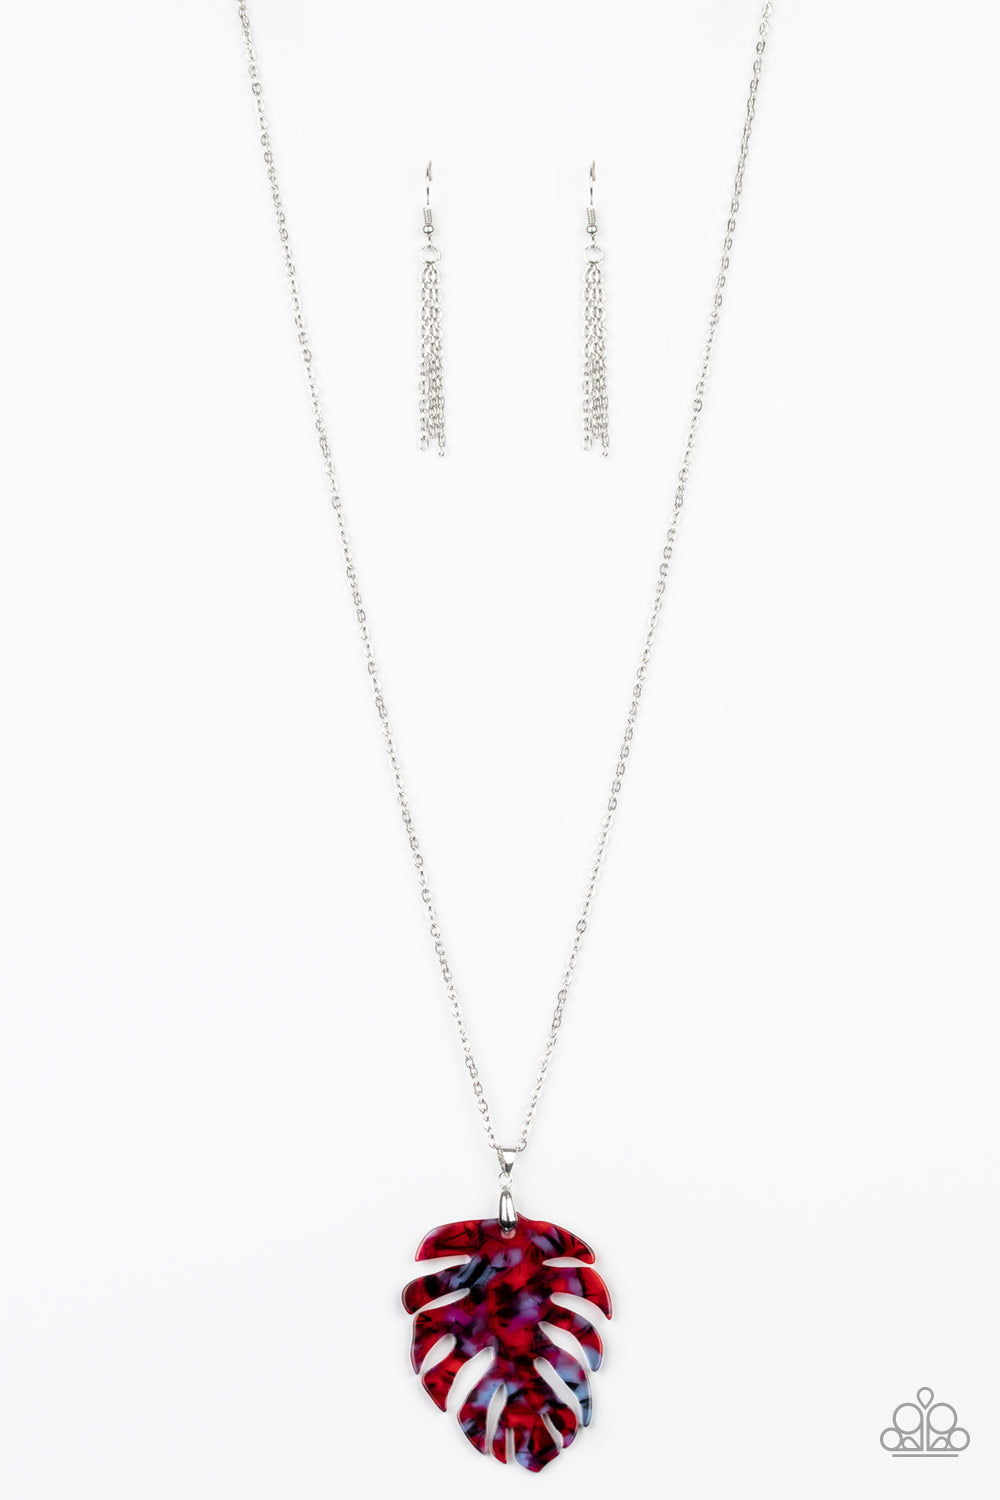 Prismatic Palms Red Acrylic Necklace - Paparazzi Accessories